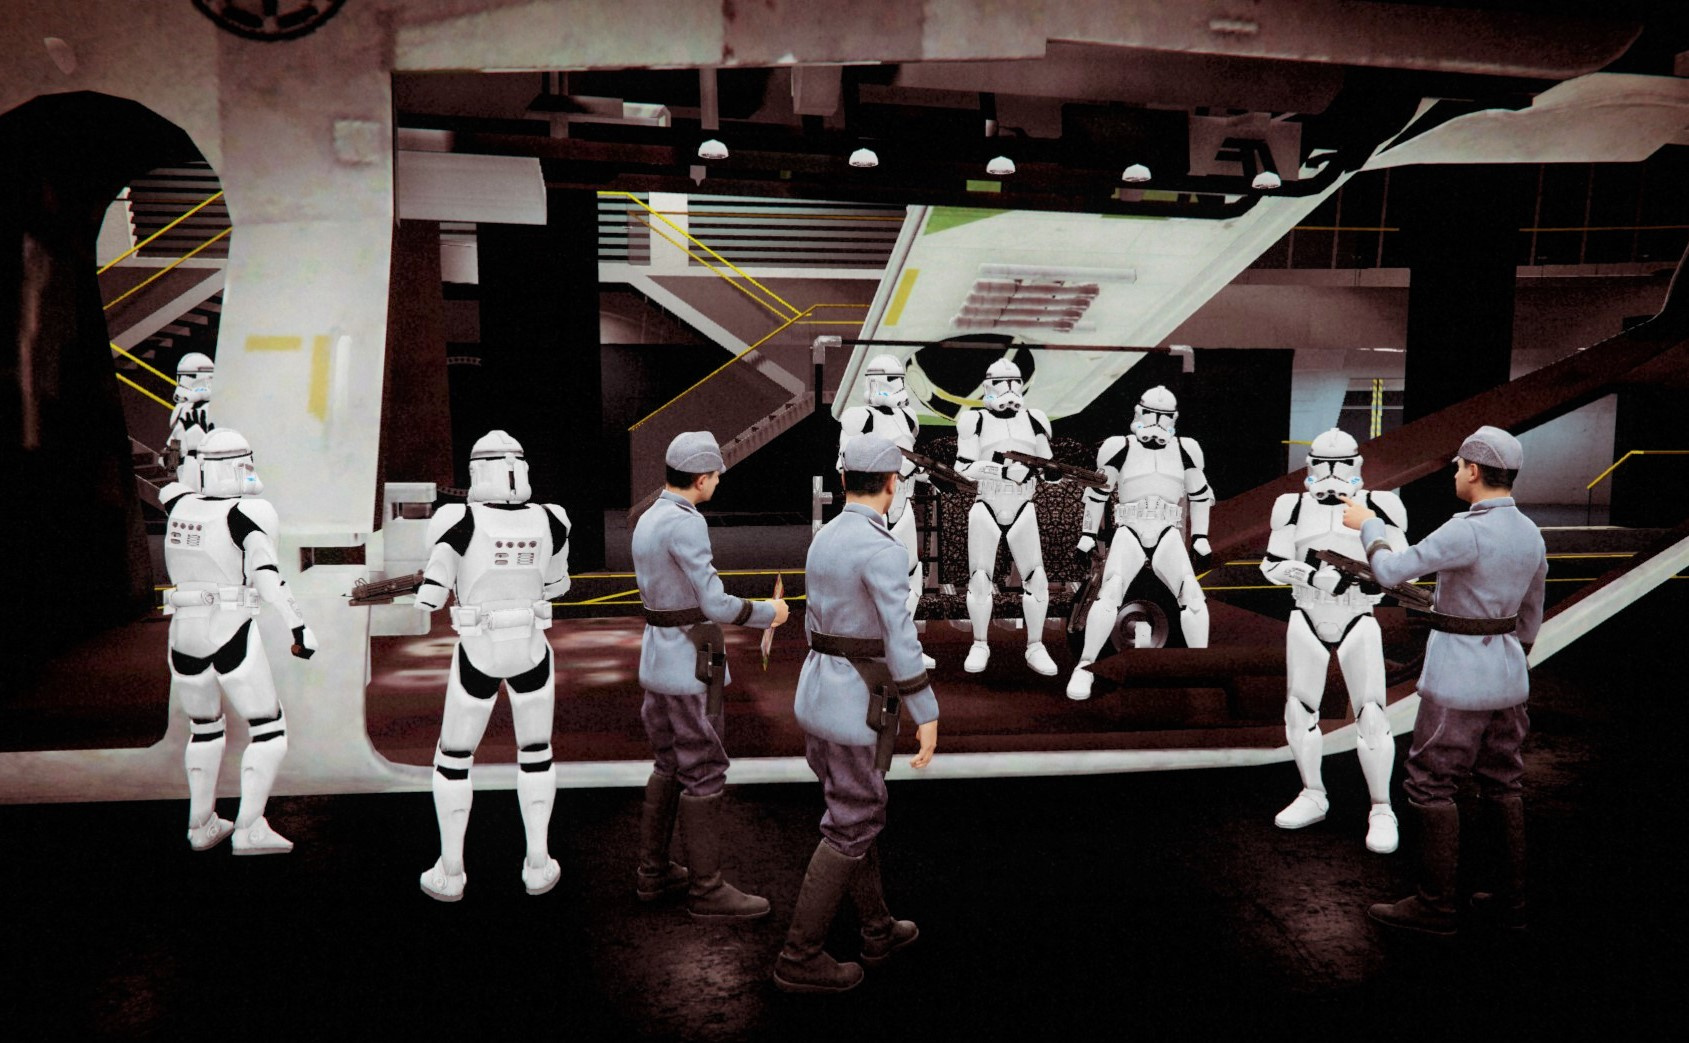 Clone Officer: Battlefront II [Add-On Ped] 